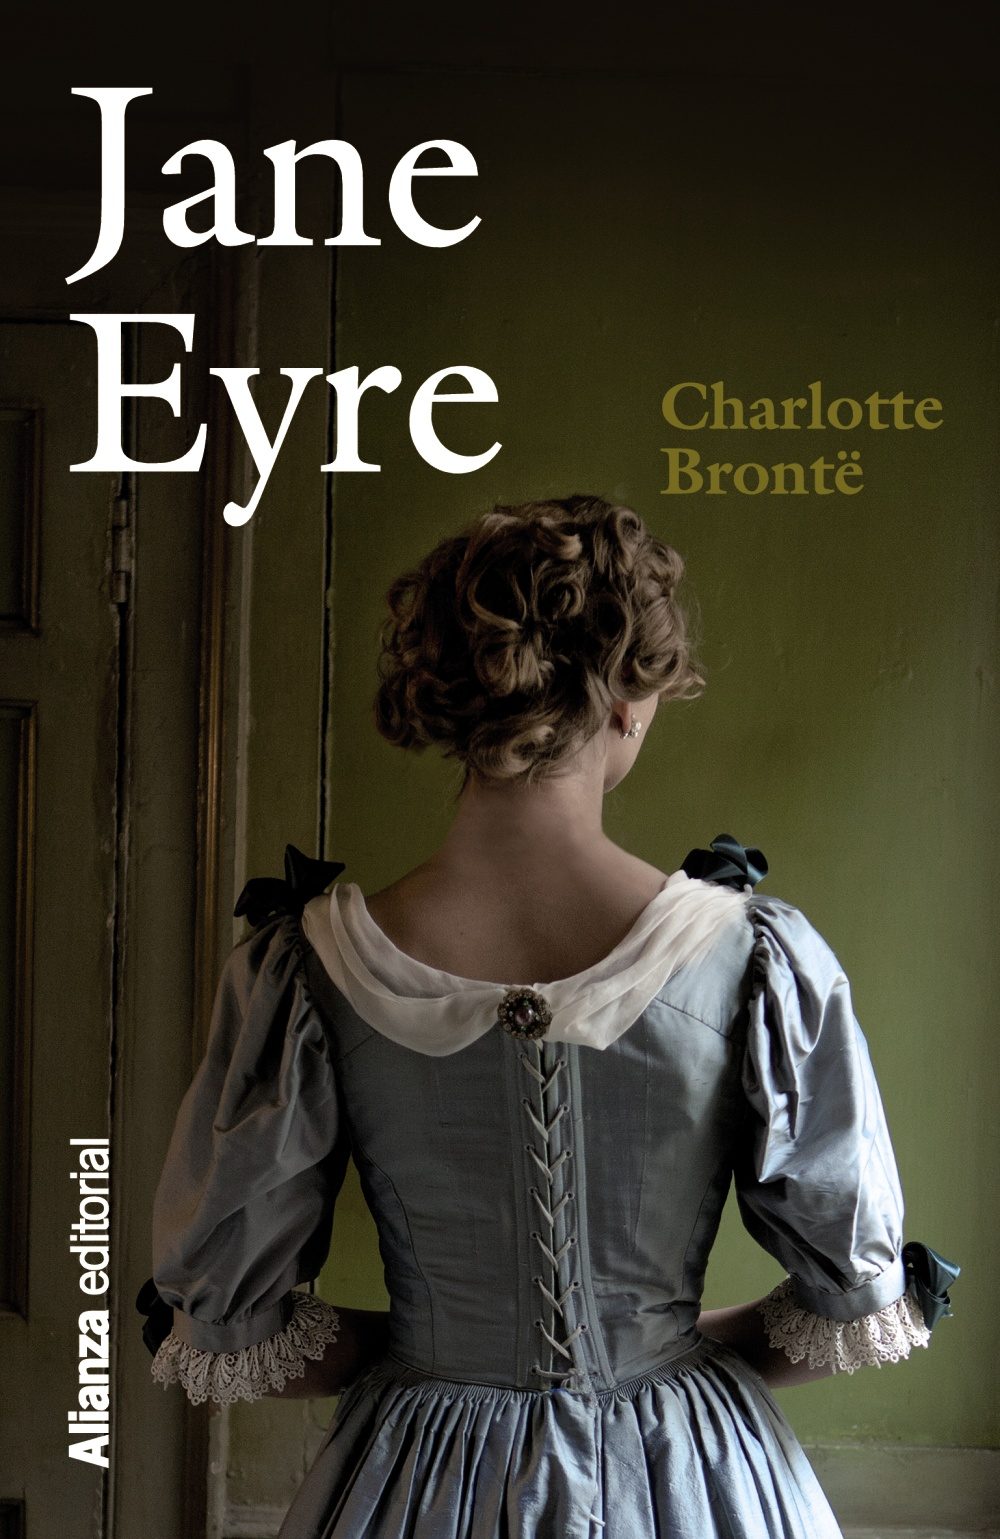 book review jane eyre charlotte bronte